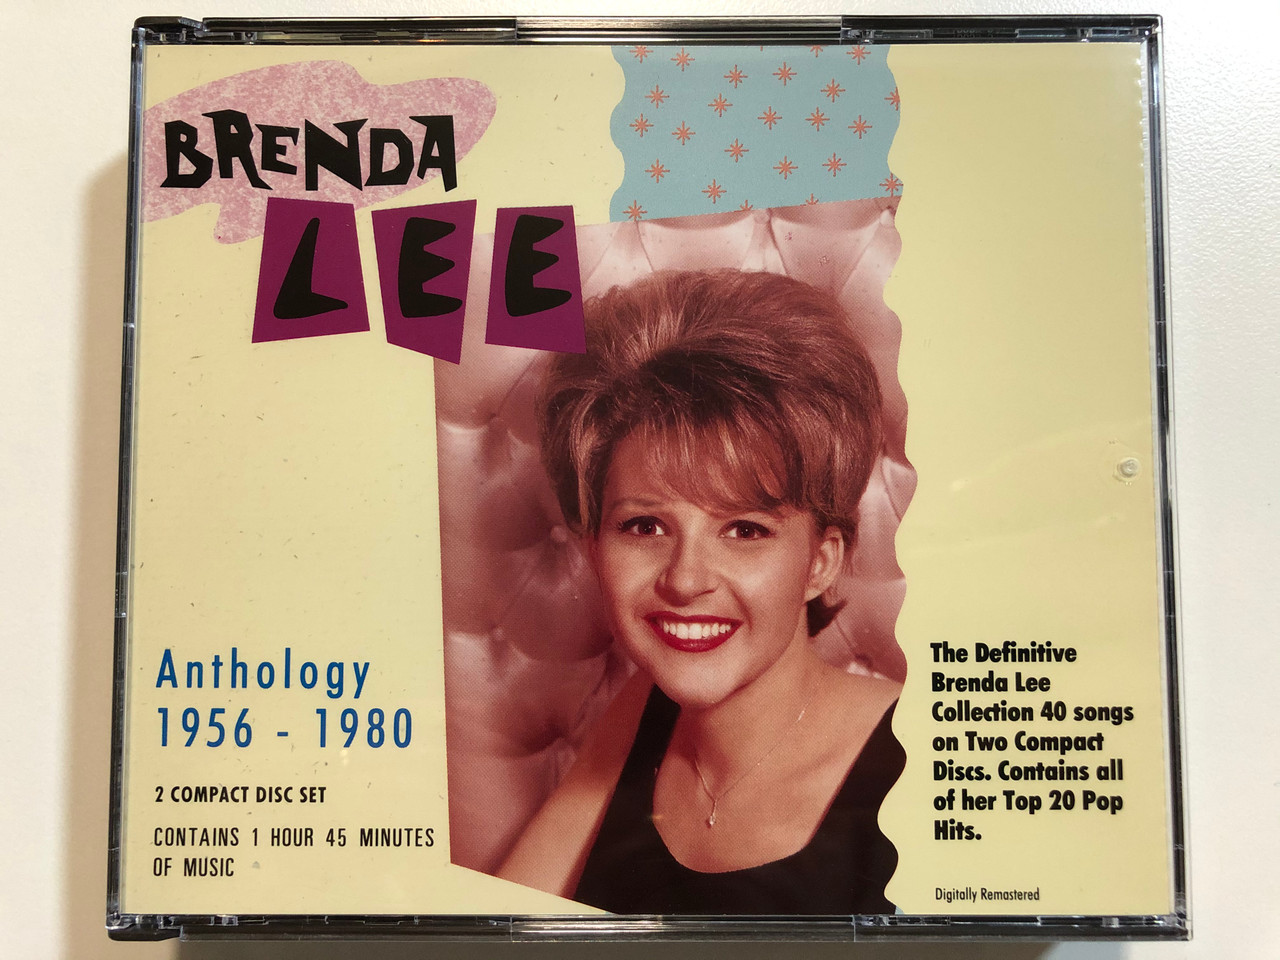 Brenda Lee – Anthology 1956-1980 / The Definitive Brenda Lee Collection 40  Songs on Two Compact Discs.